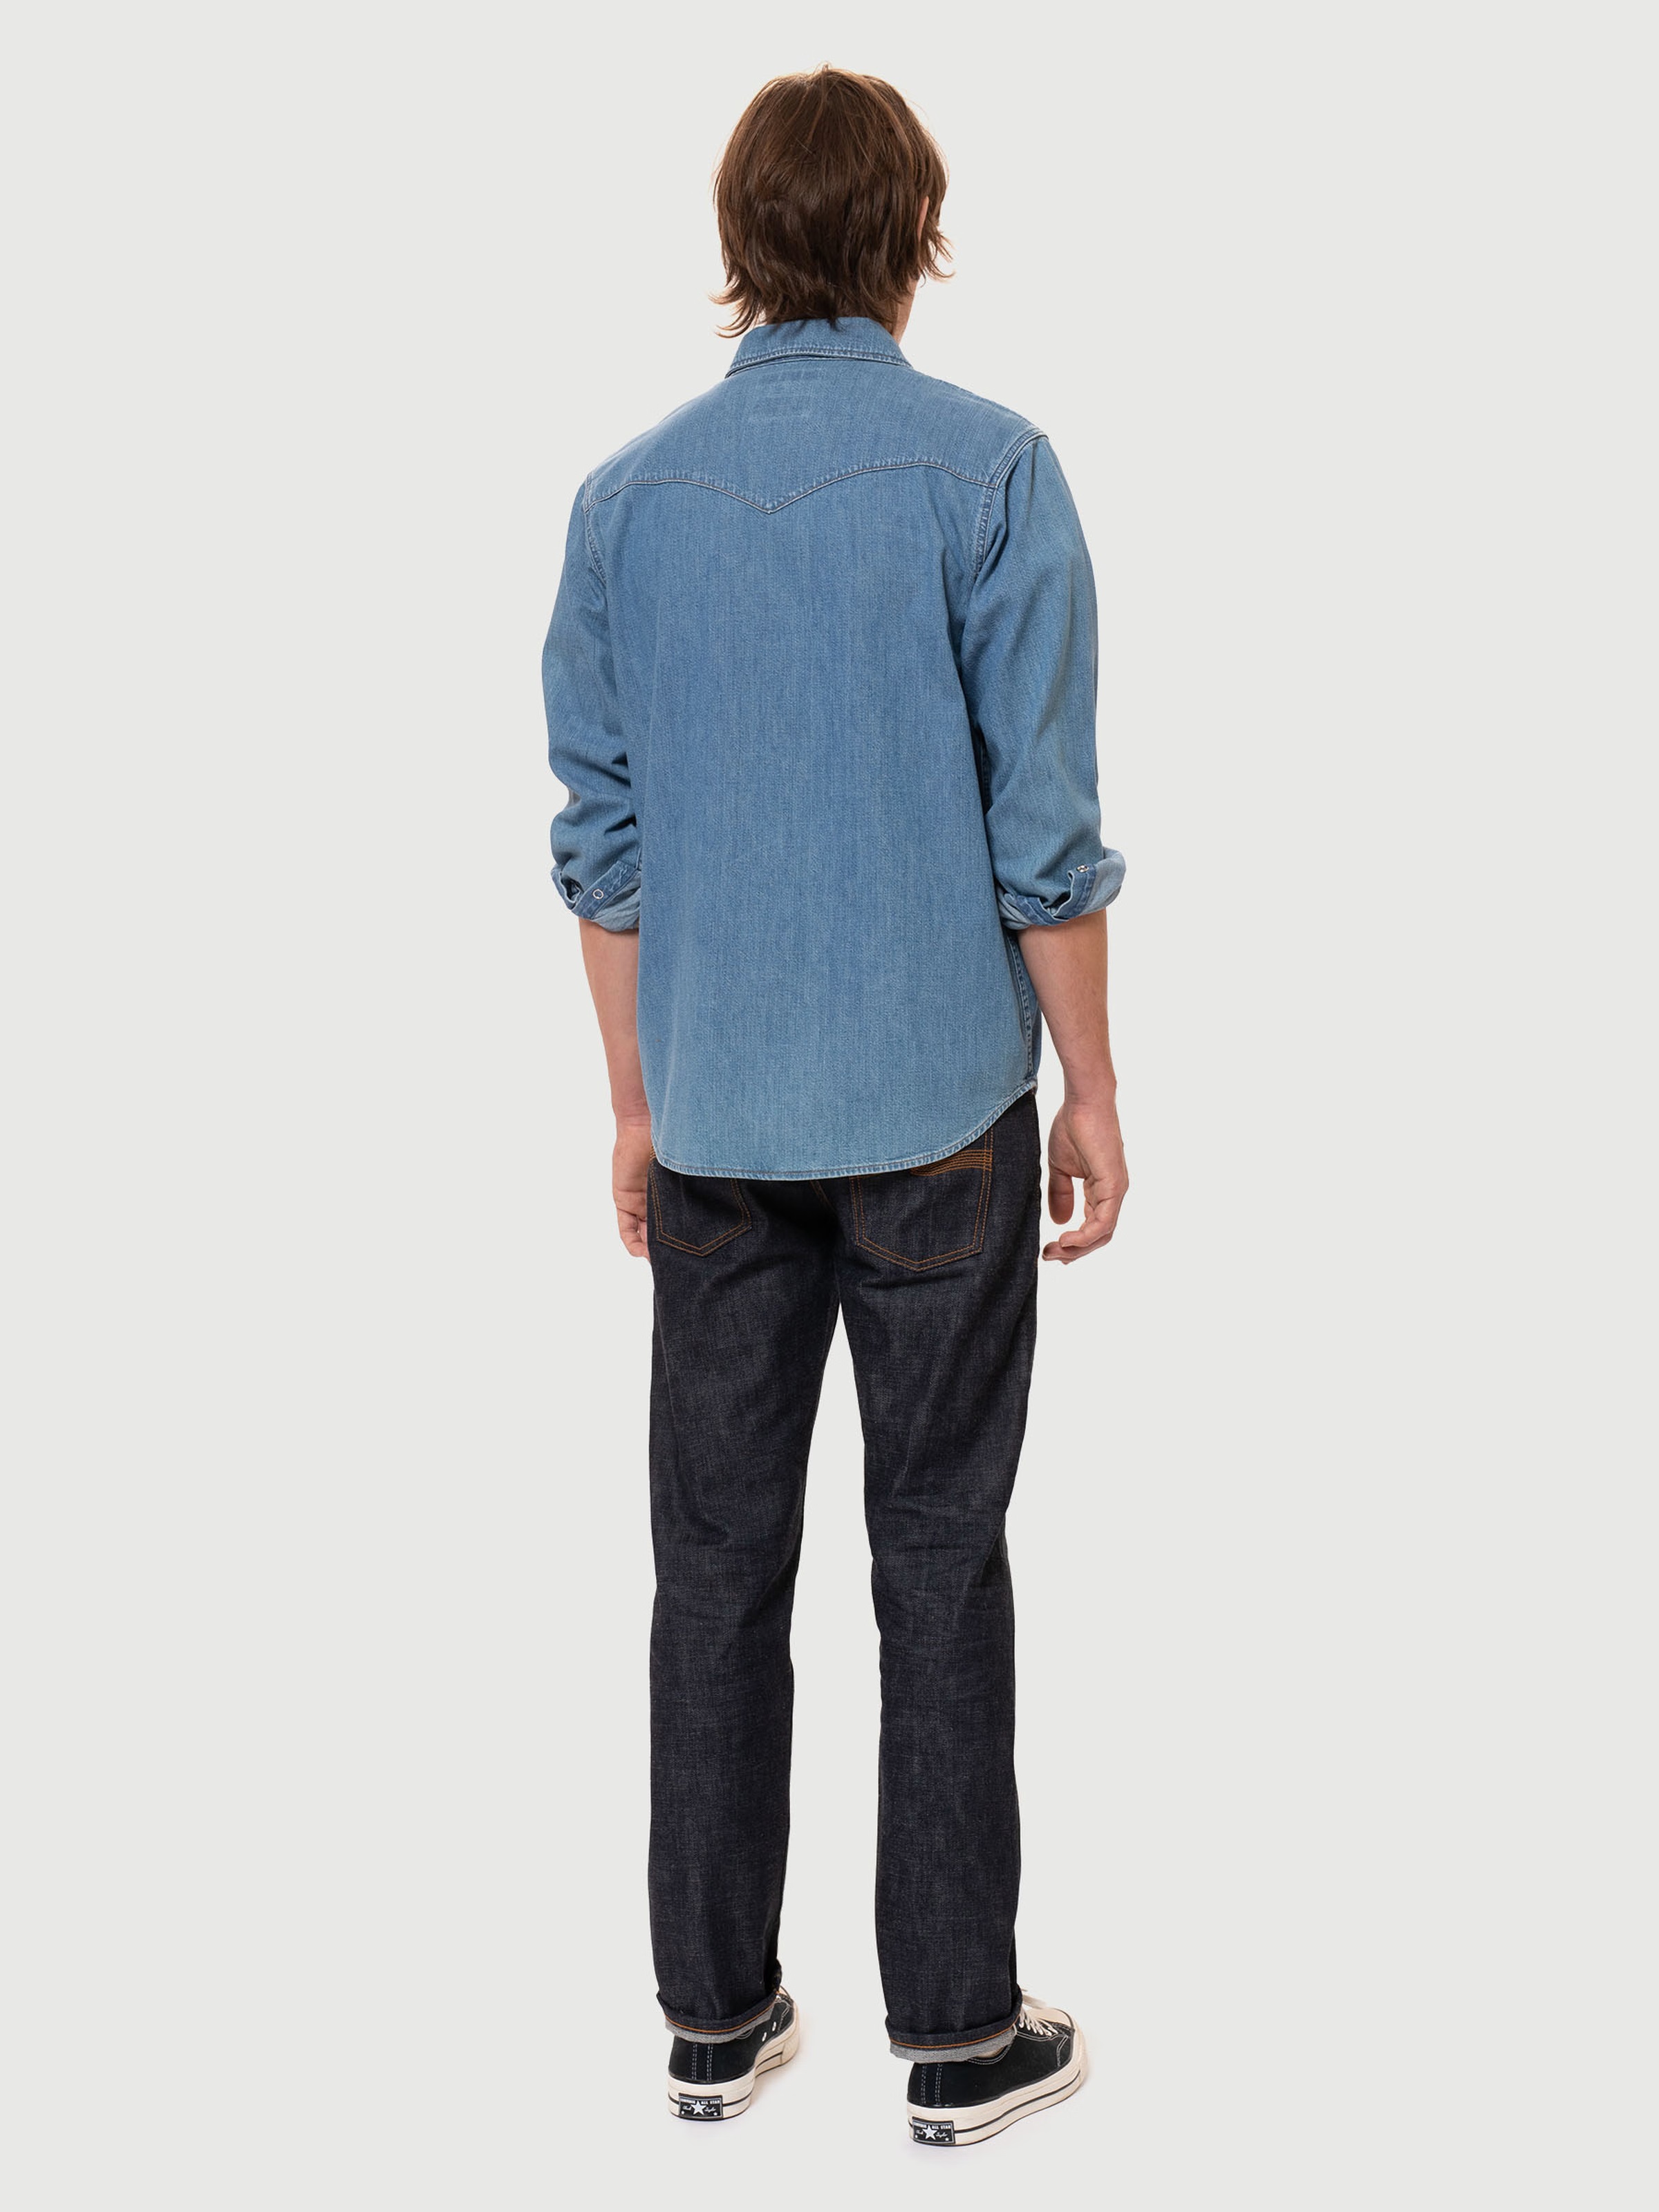 Jeans-Hemd George Another Kind Of Blue Denim